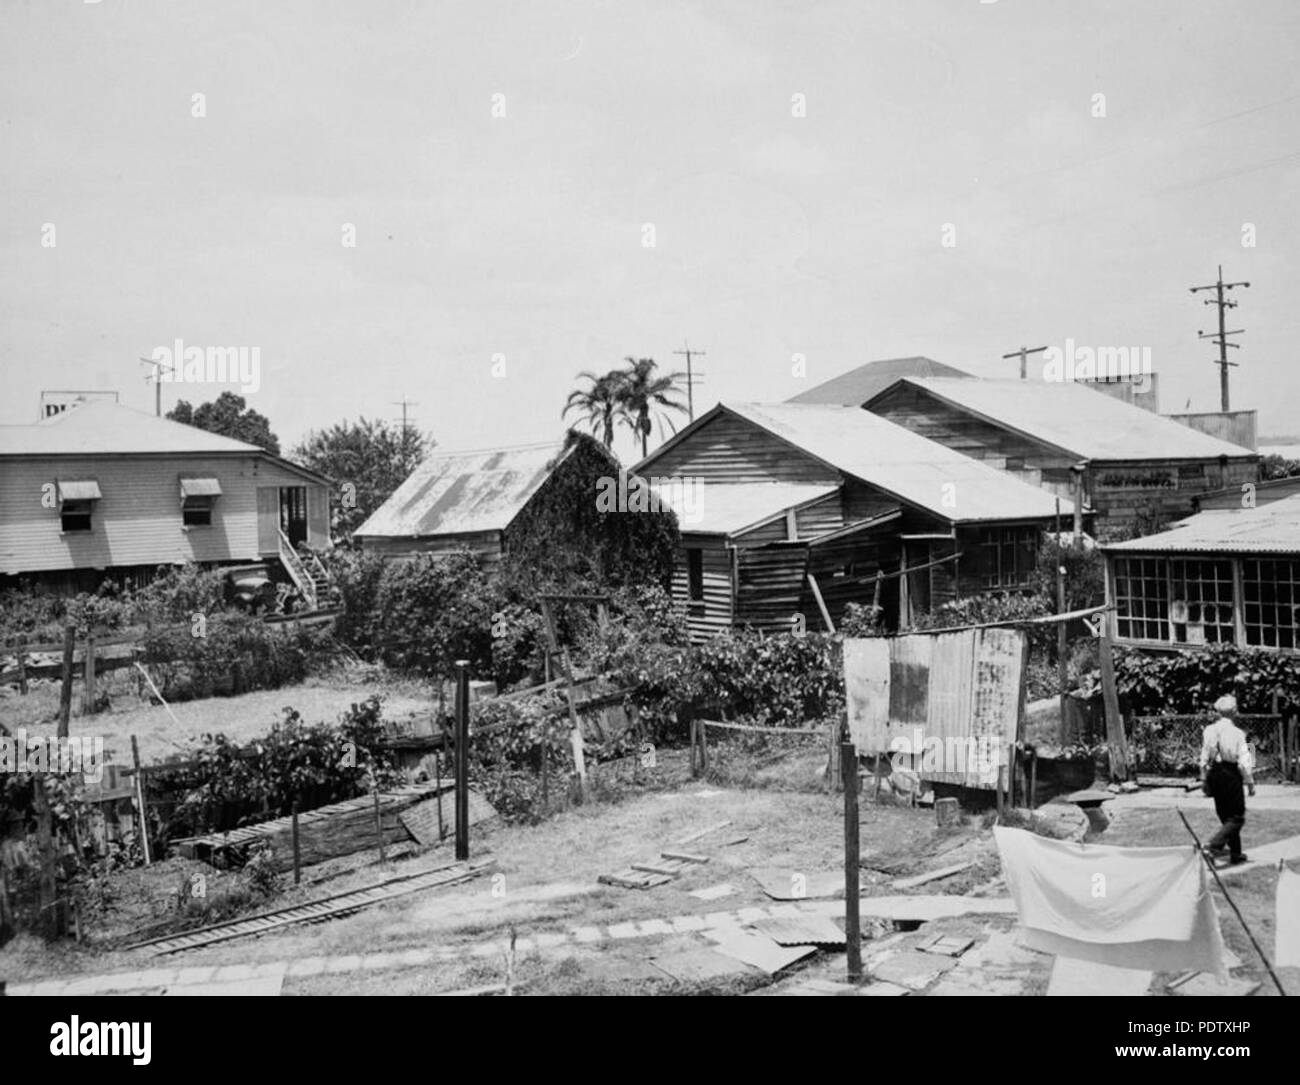 213 StateLibQld 1 123848 Backyards of a mixed business and some housing, Rocklea area Stock Photo